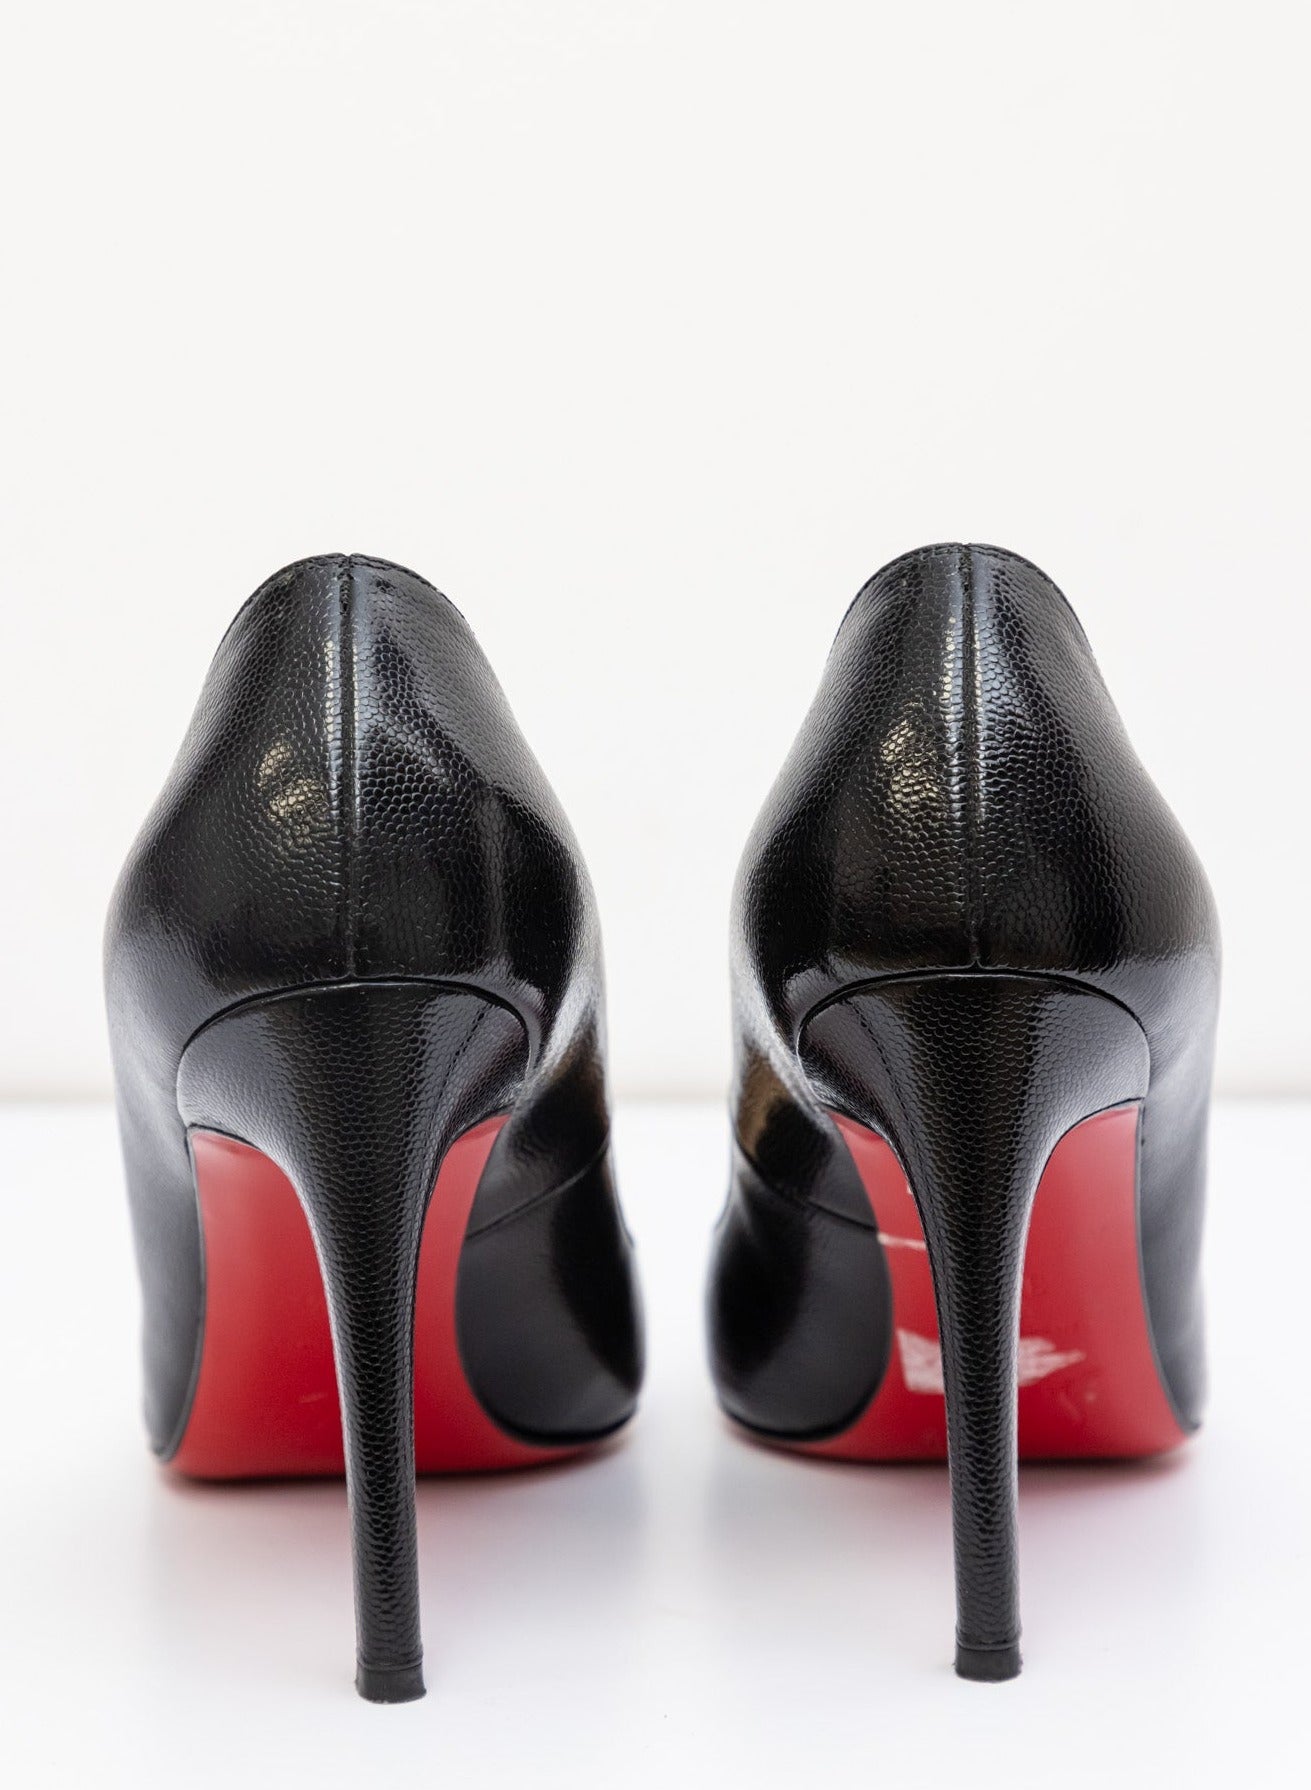 CHRISTIAN LOUBOUTIN Kate 100 Point-Toe Leather Pumps | Black | Very Good Condition | Made in Italy